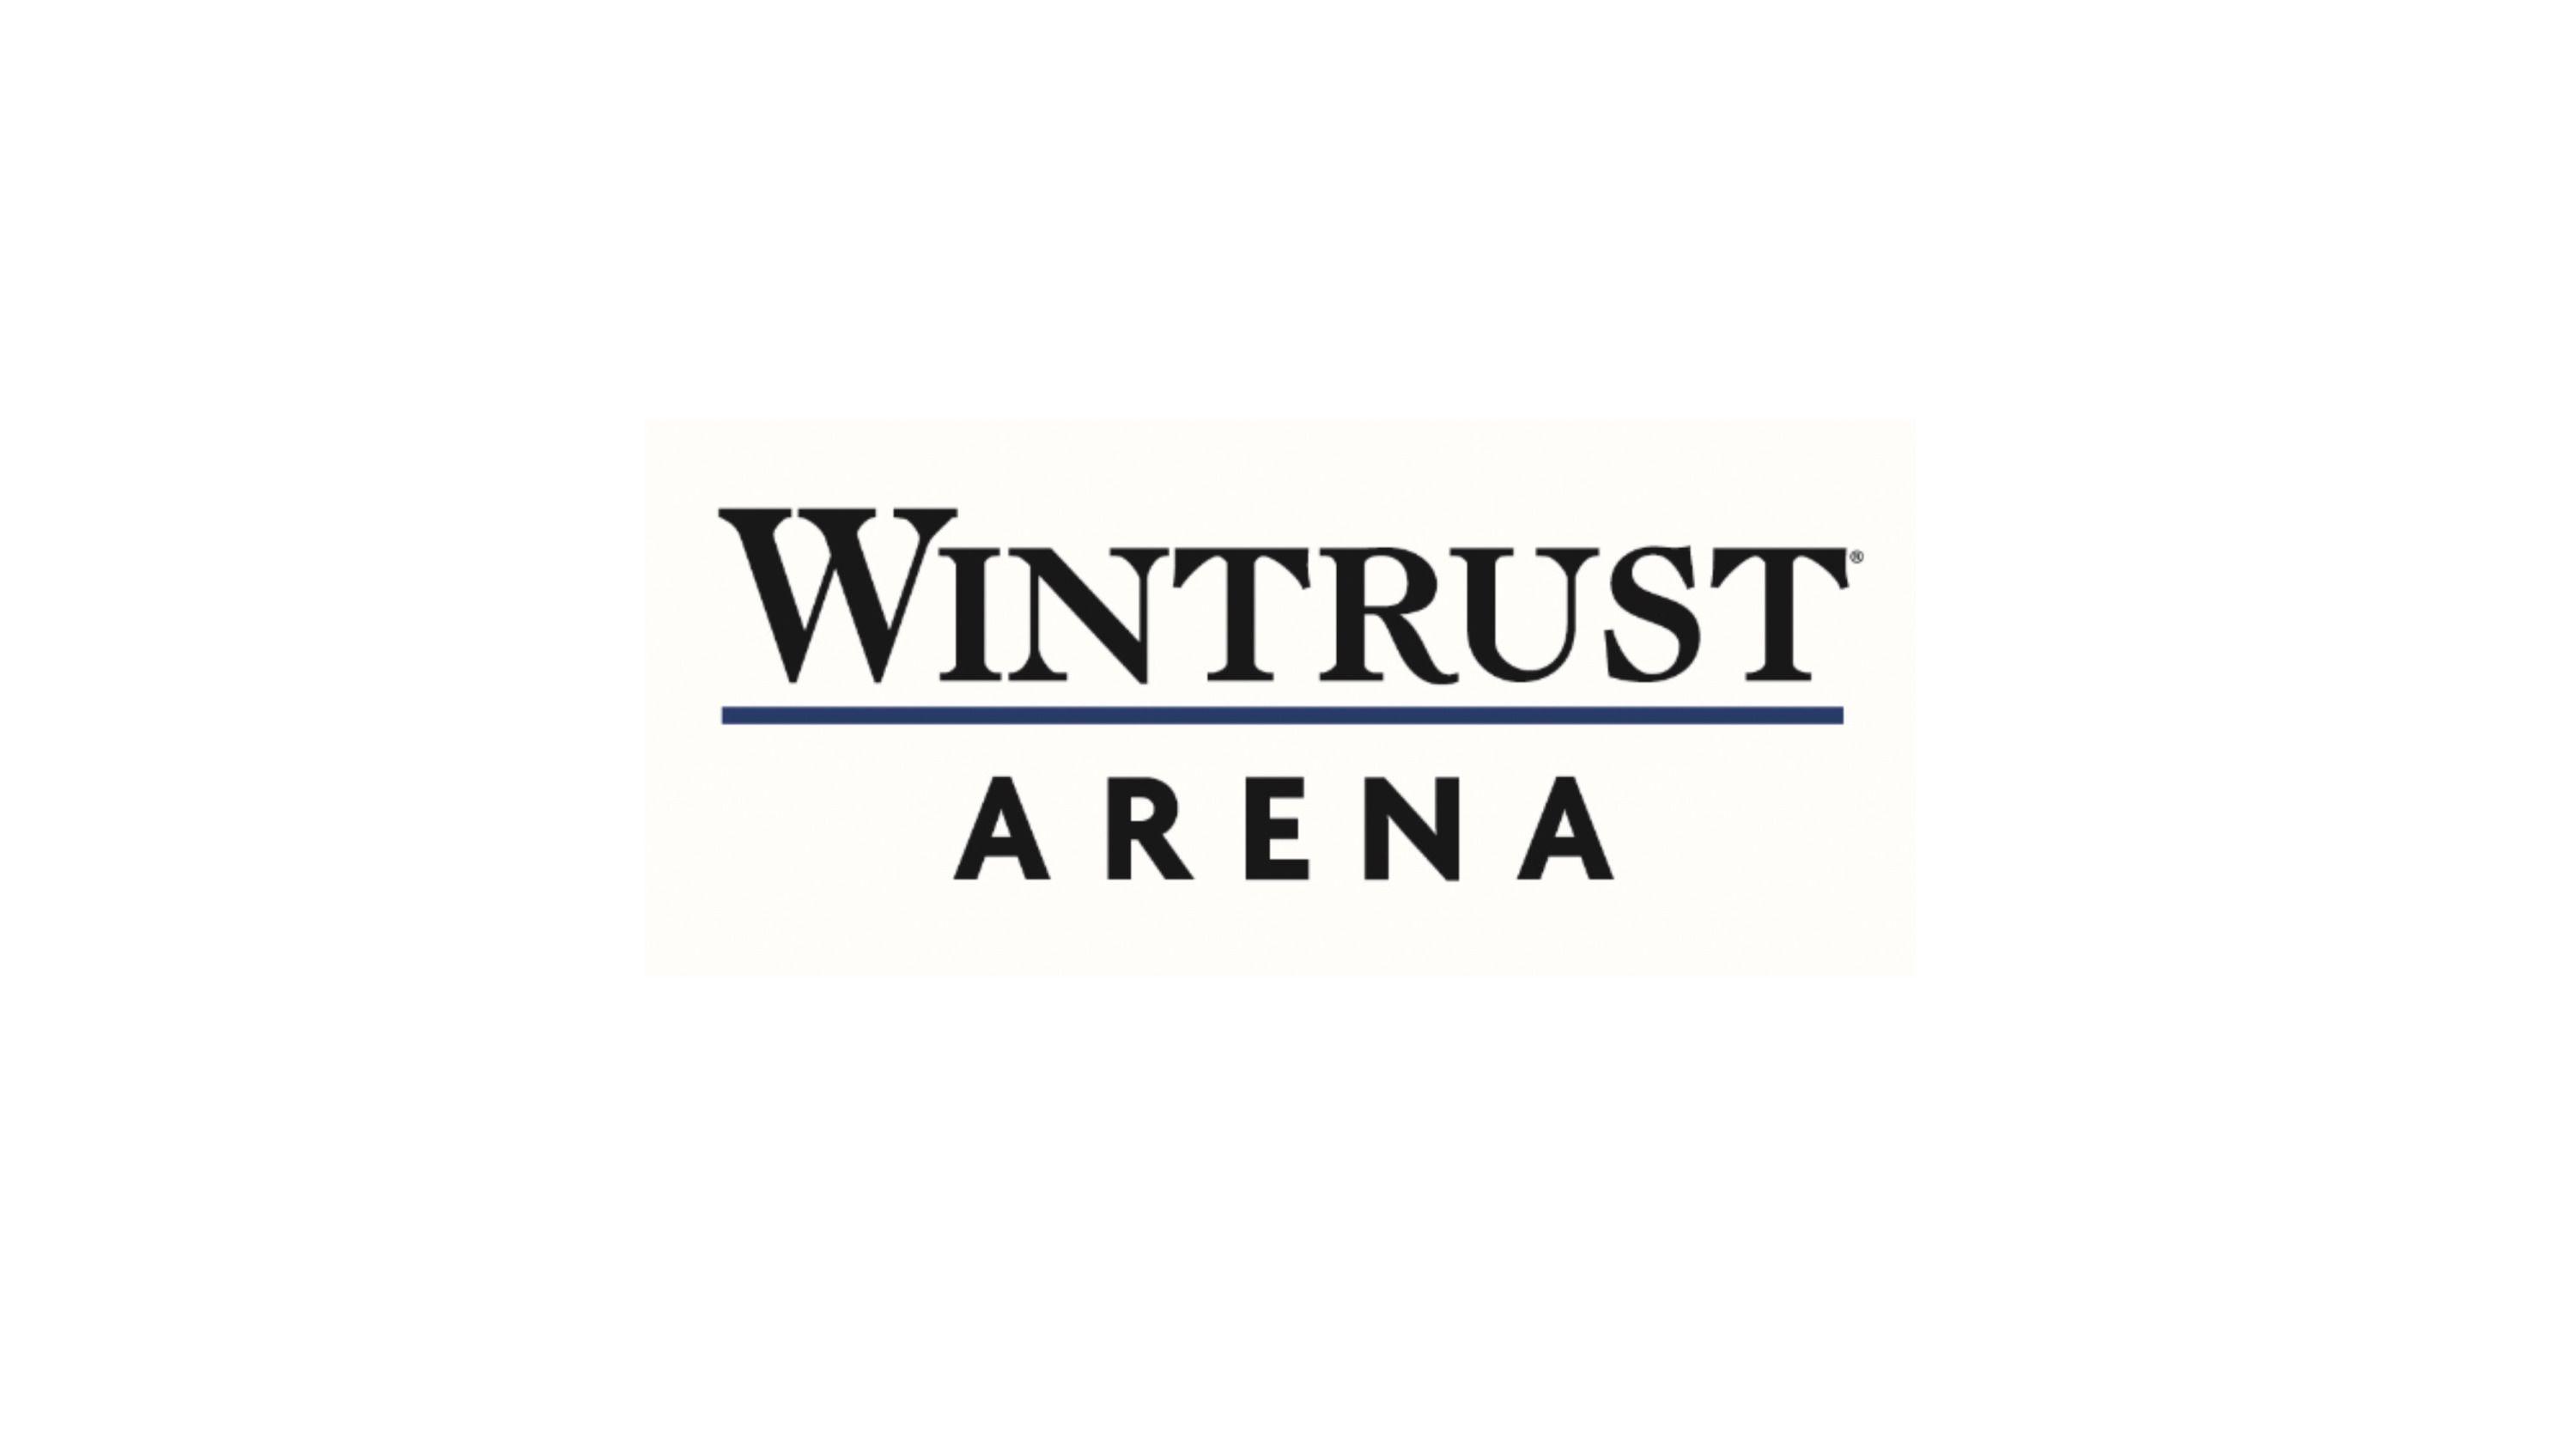 Wintrust Logo - Event Center at McCormick Square to be named Wintrust Arena